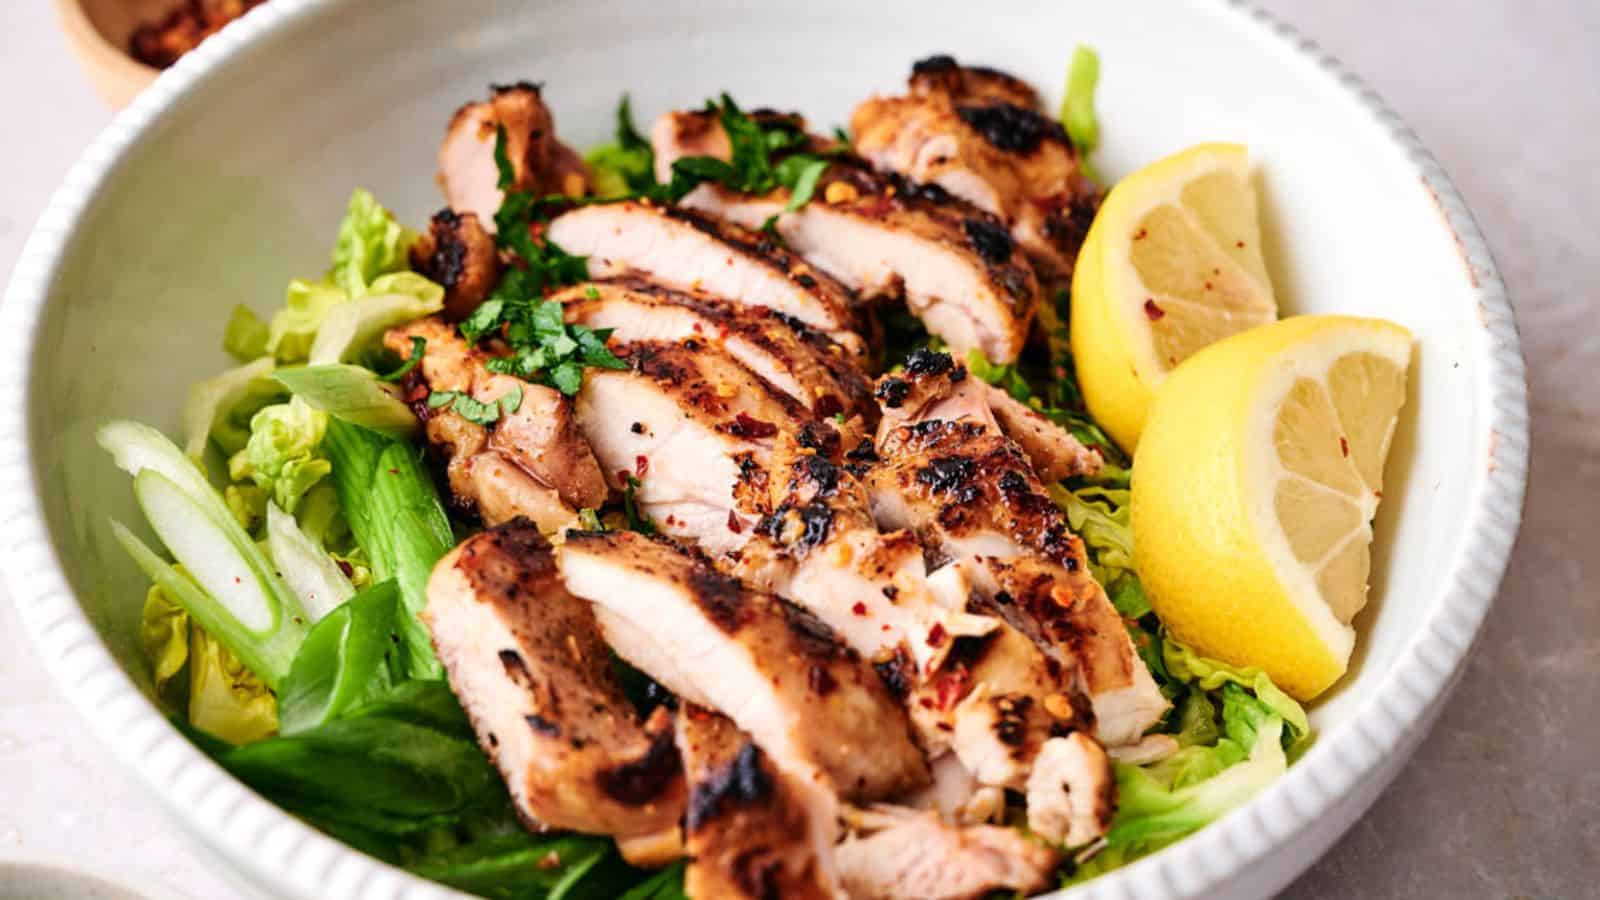 <p>For those who like a little smoky heat, Chipotle Grilled Chicken is a game-changer. It's perfect for spicing up barbecue nights or adding some zest to your salads and wraps.<br><strong>Get the Recipe: </strong><a href="https://www.pocketfriendlyrecipes.com/chipotle-grilled-chicken/?utm_source=msn&utm_medium=page&utm_campaign=msn">Chipotle Grilled Chicken</a></p>